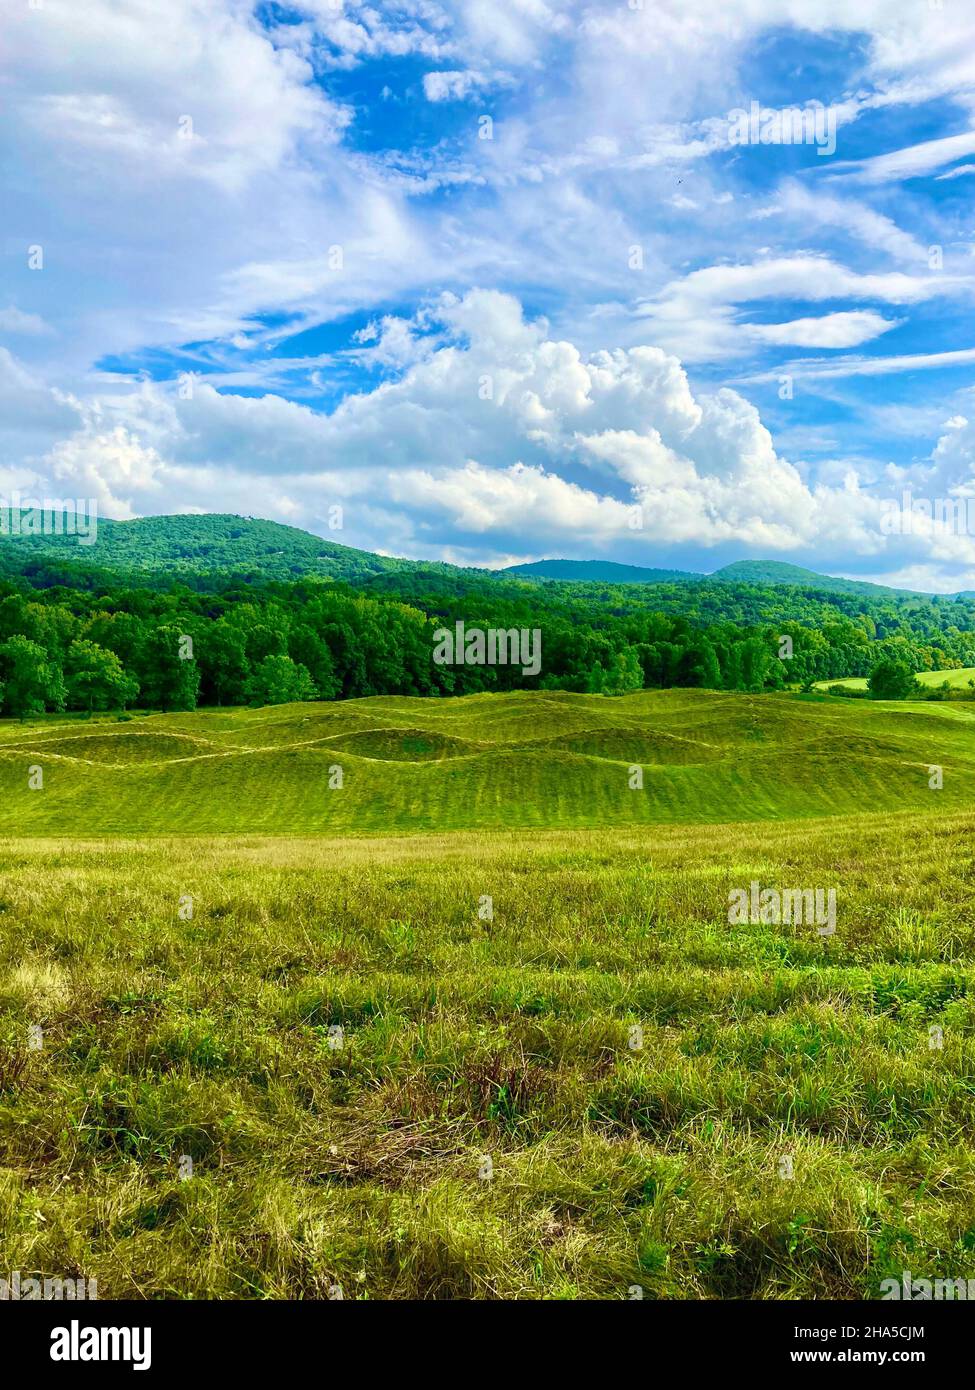 storm king art center,new windsor,ny. 'wavefield' earth sculpture by maya lin corresponds with surring catskill mountains hills Stock Photo